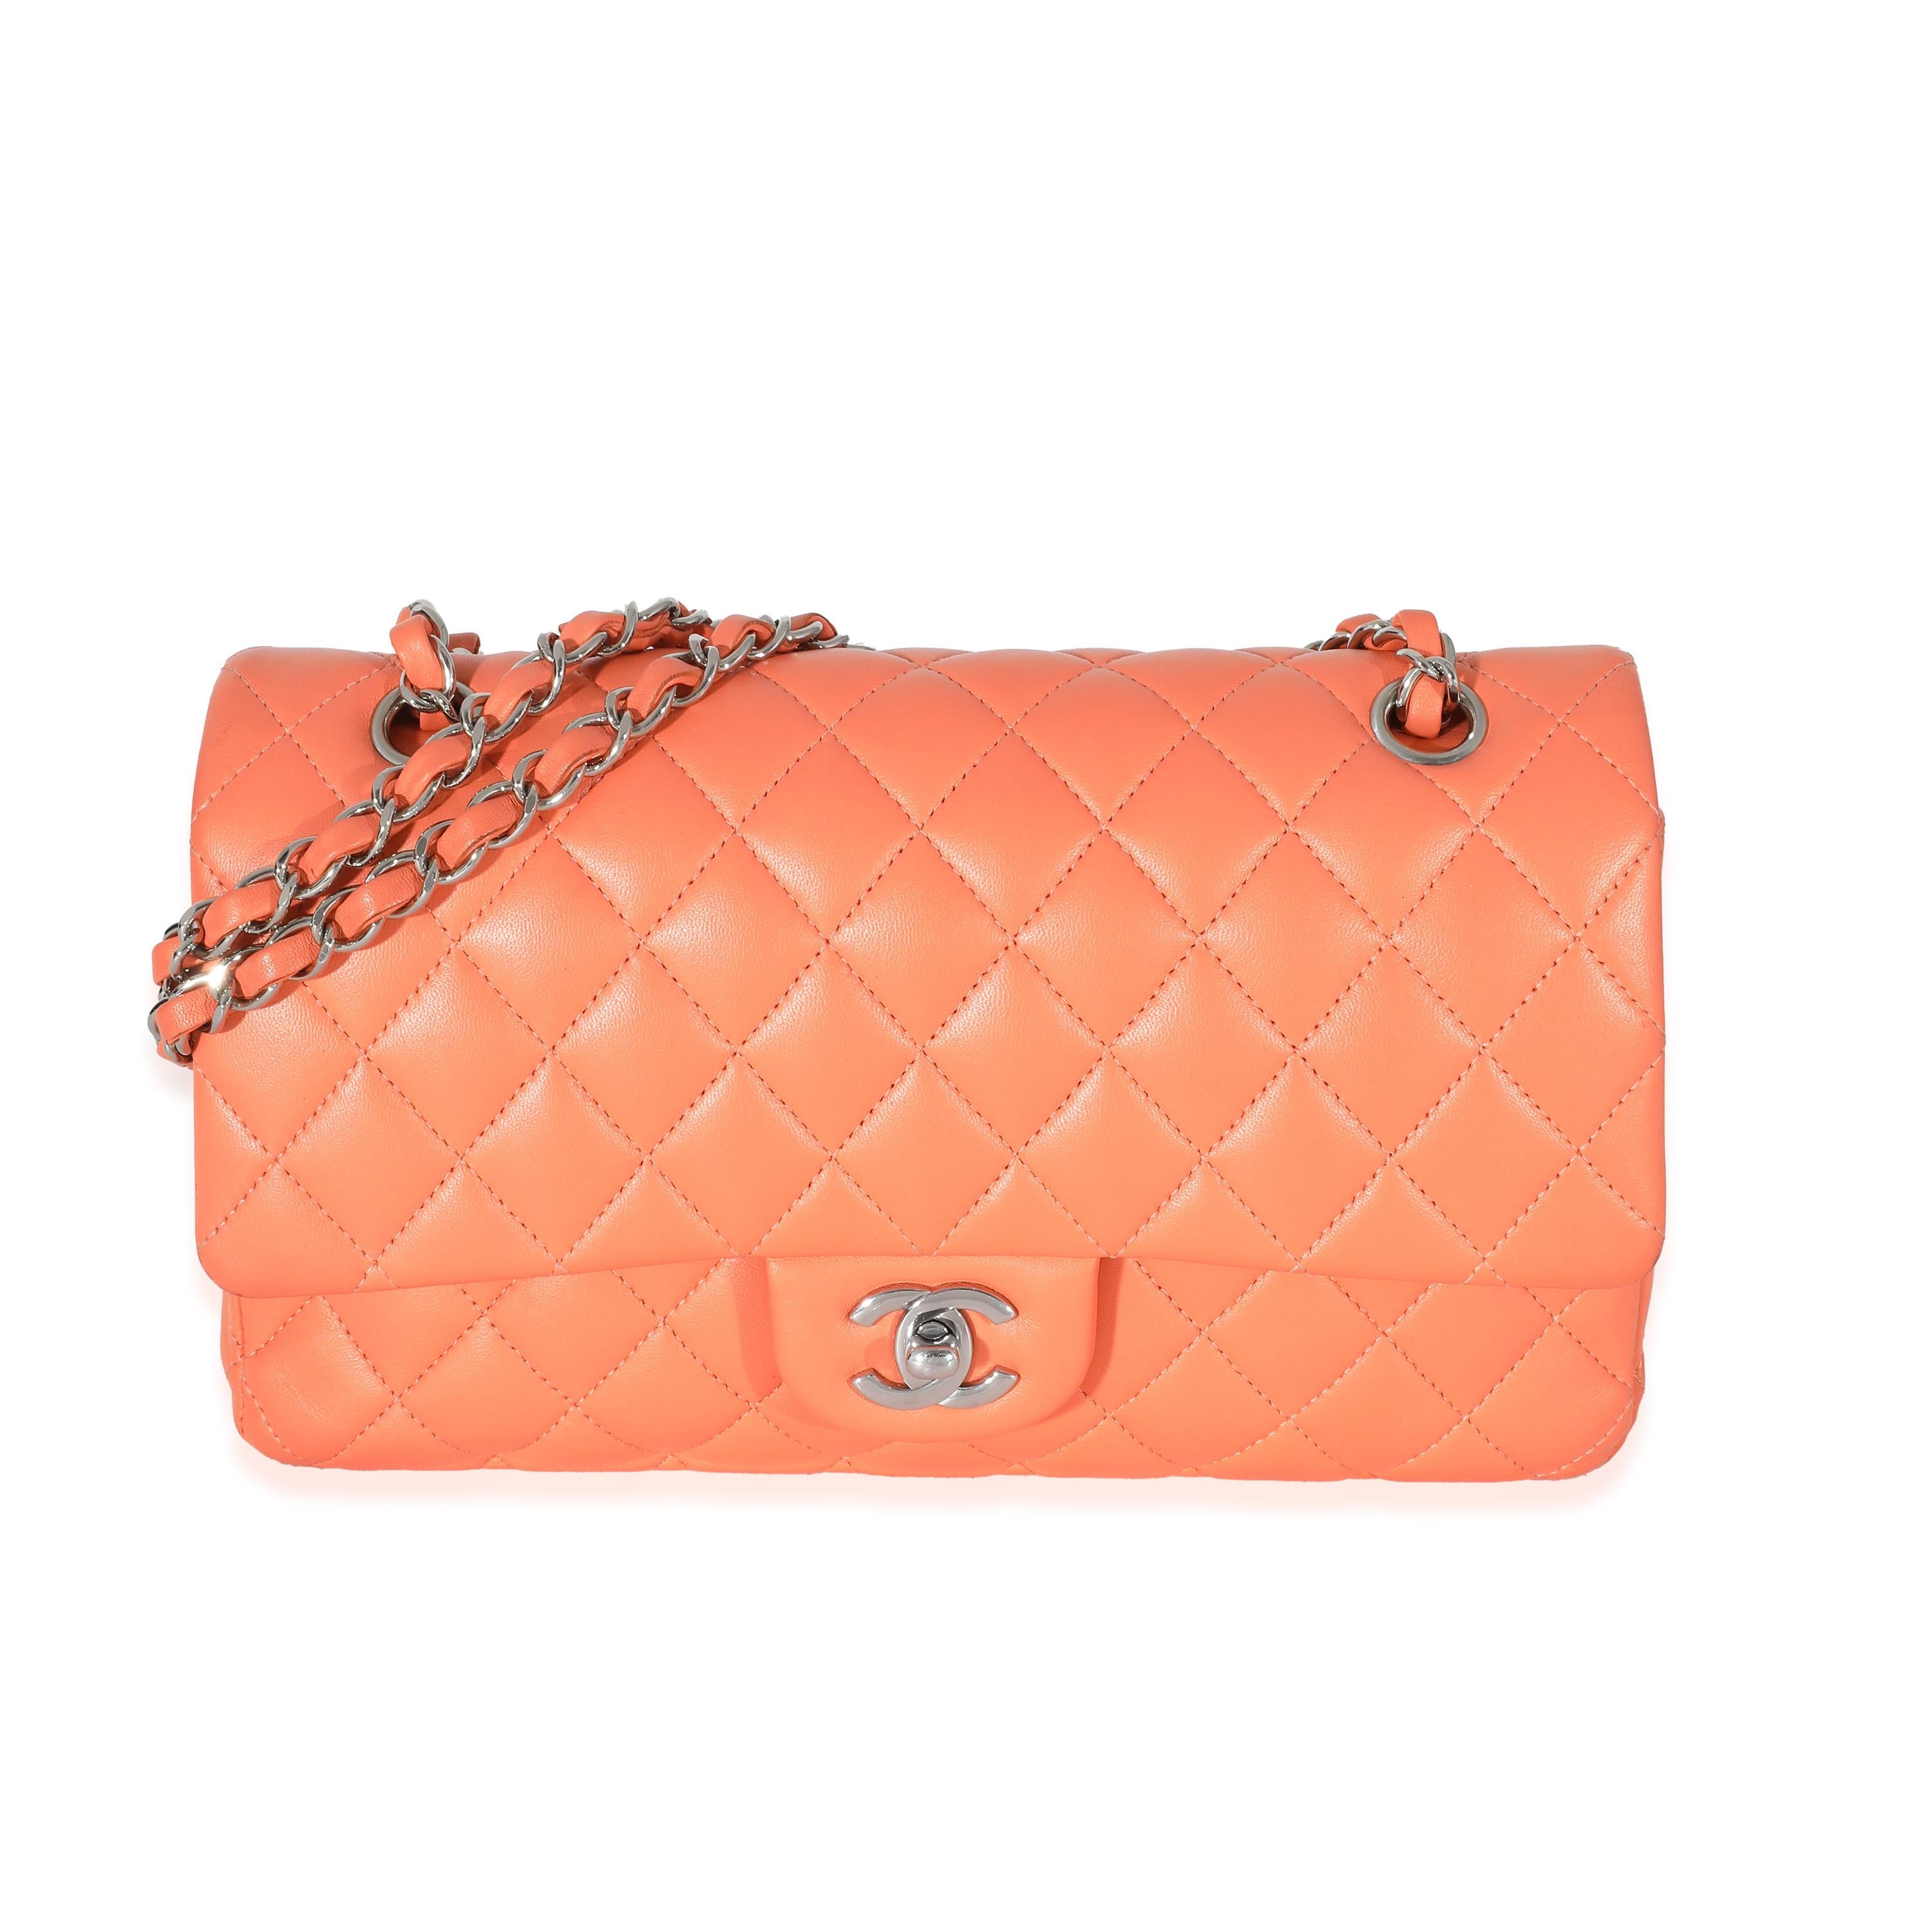 Chanel Orange Quilted Lambskin Medium Classic Double Flap Bag For Sale